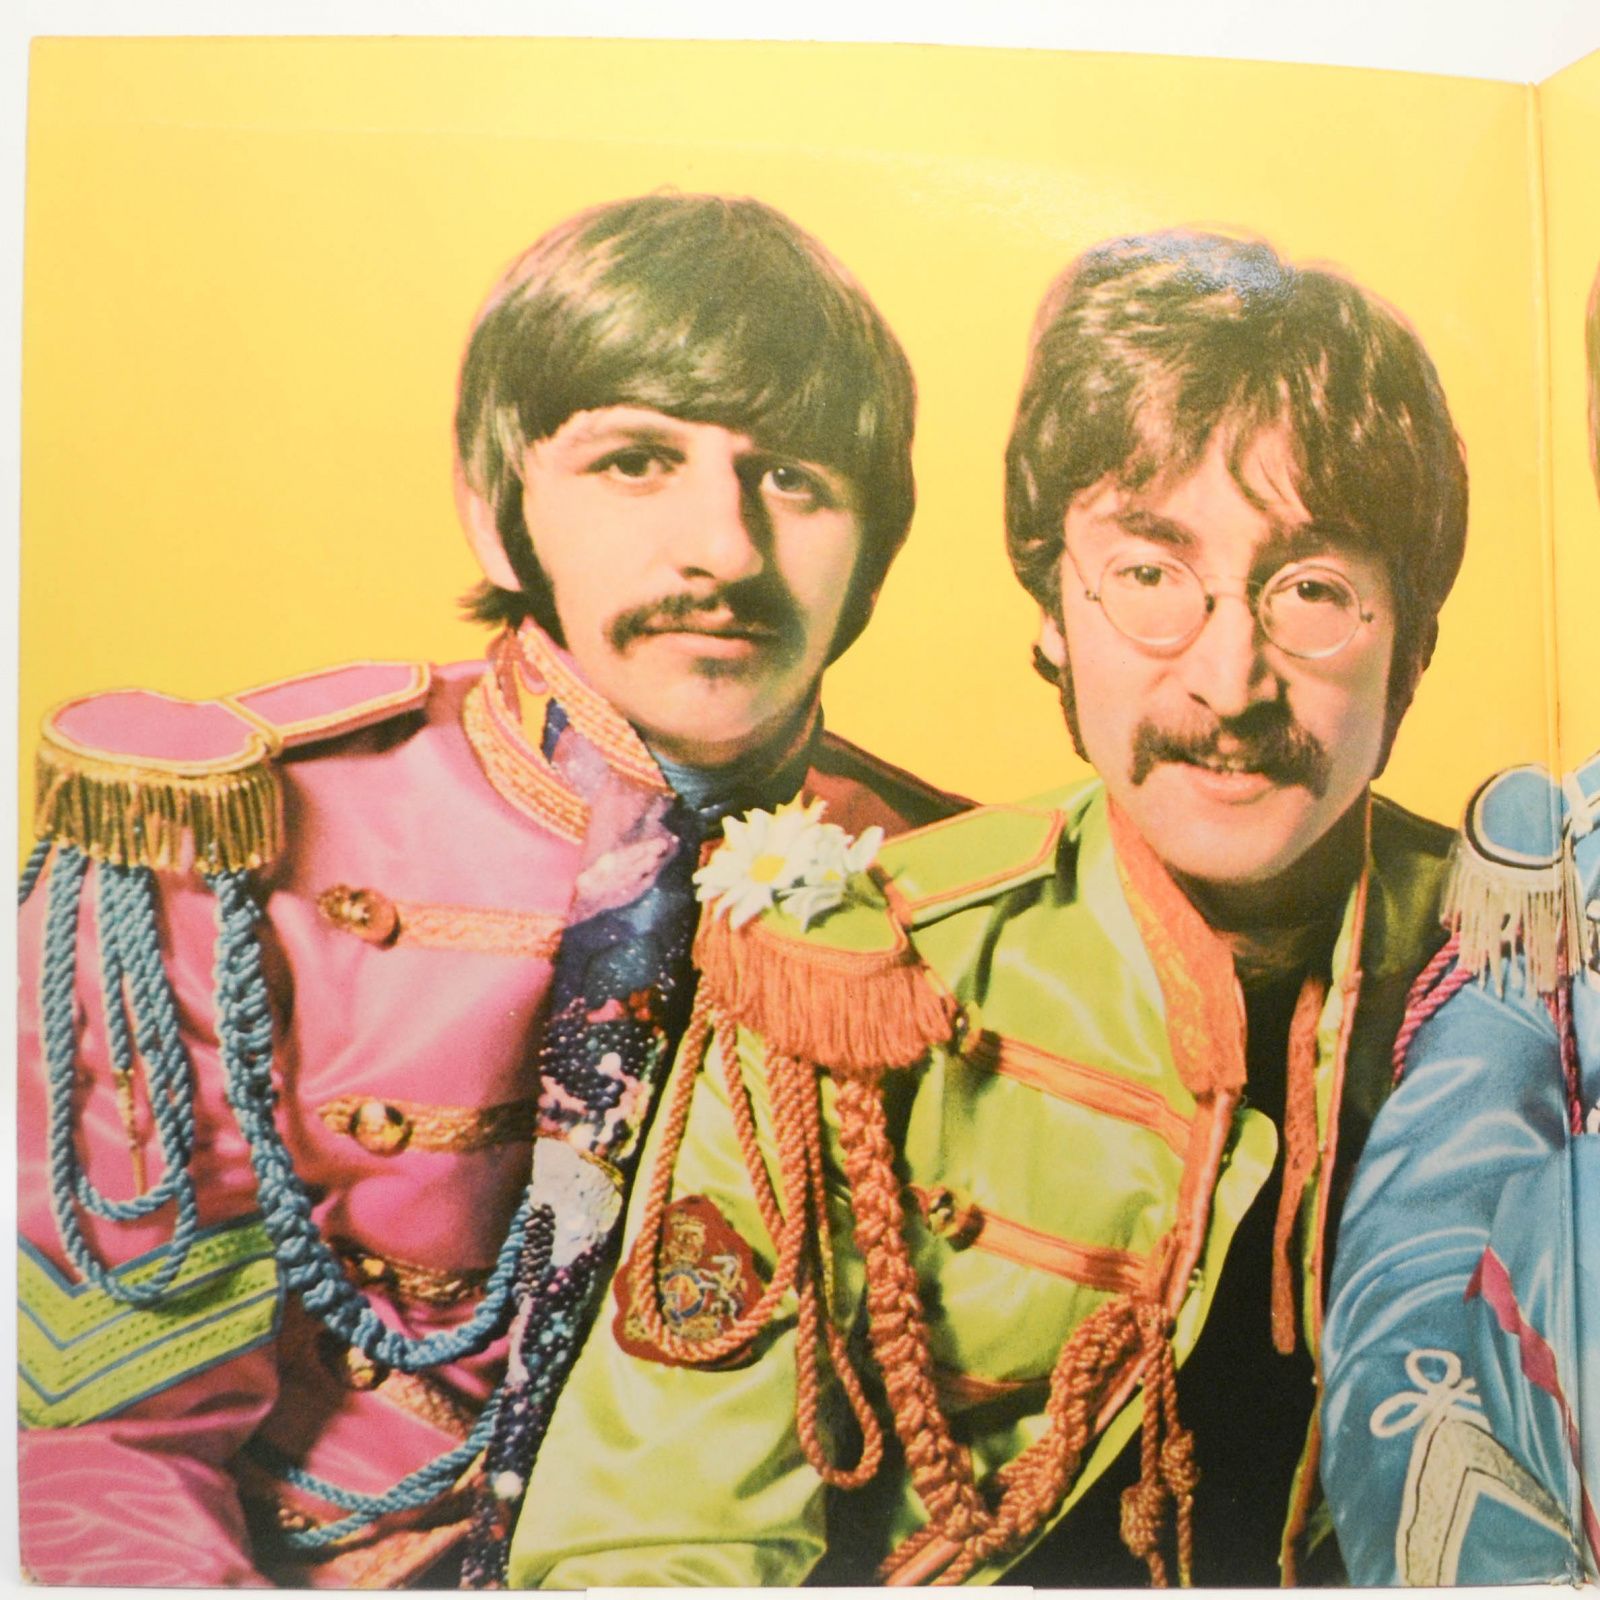 Beatles — Sgt. Pepper's Lonely Hearts Club Band, 1967